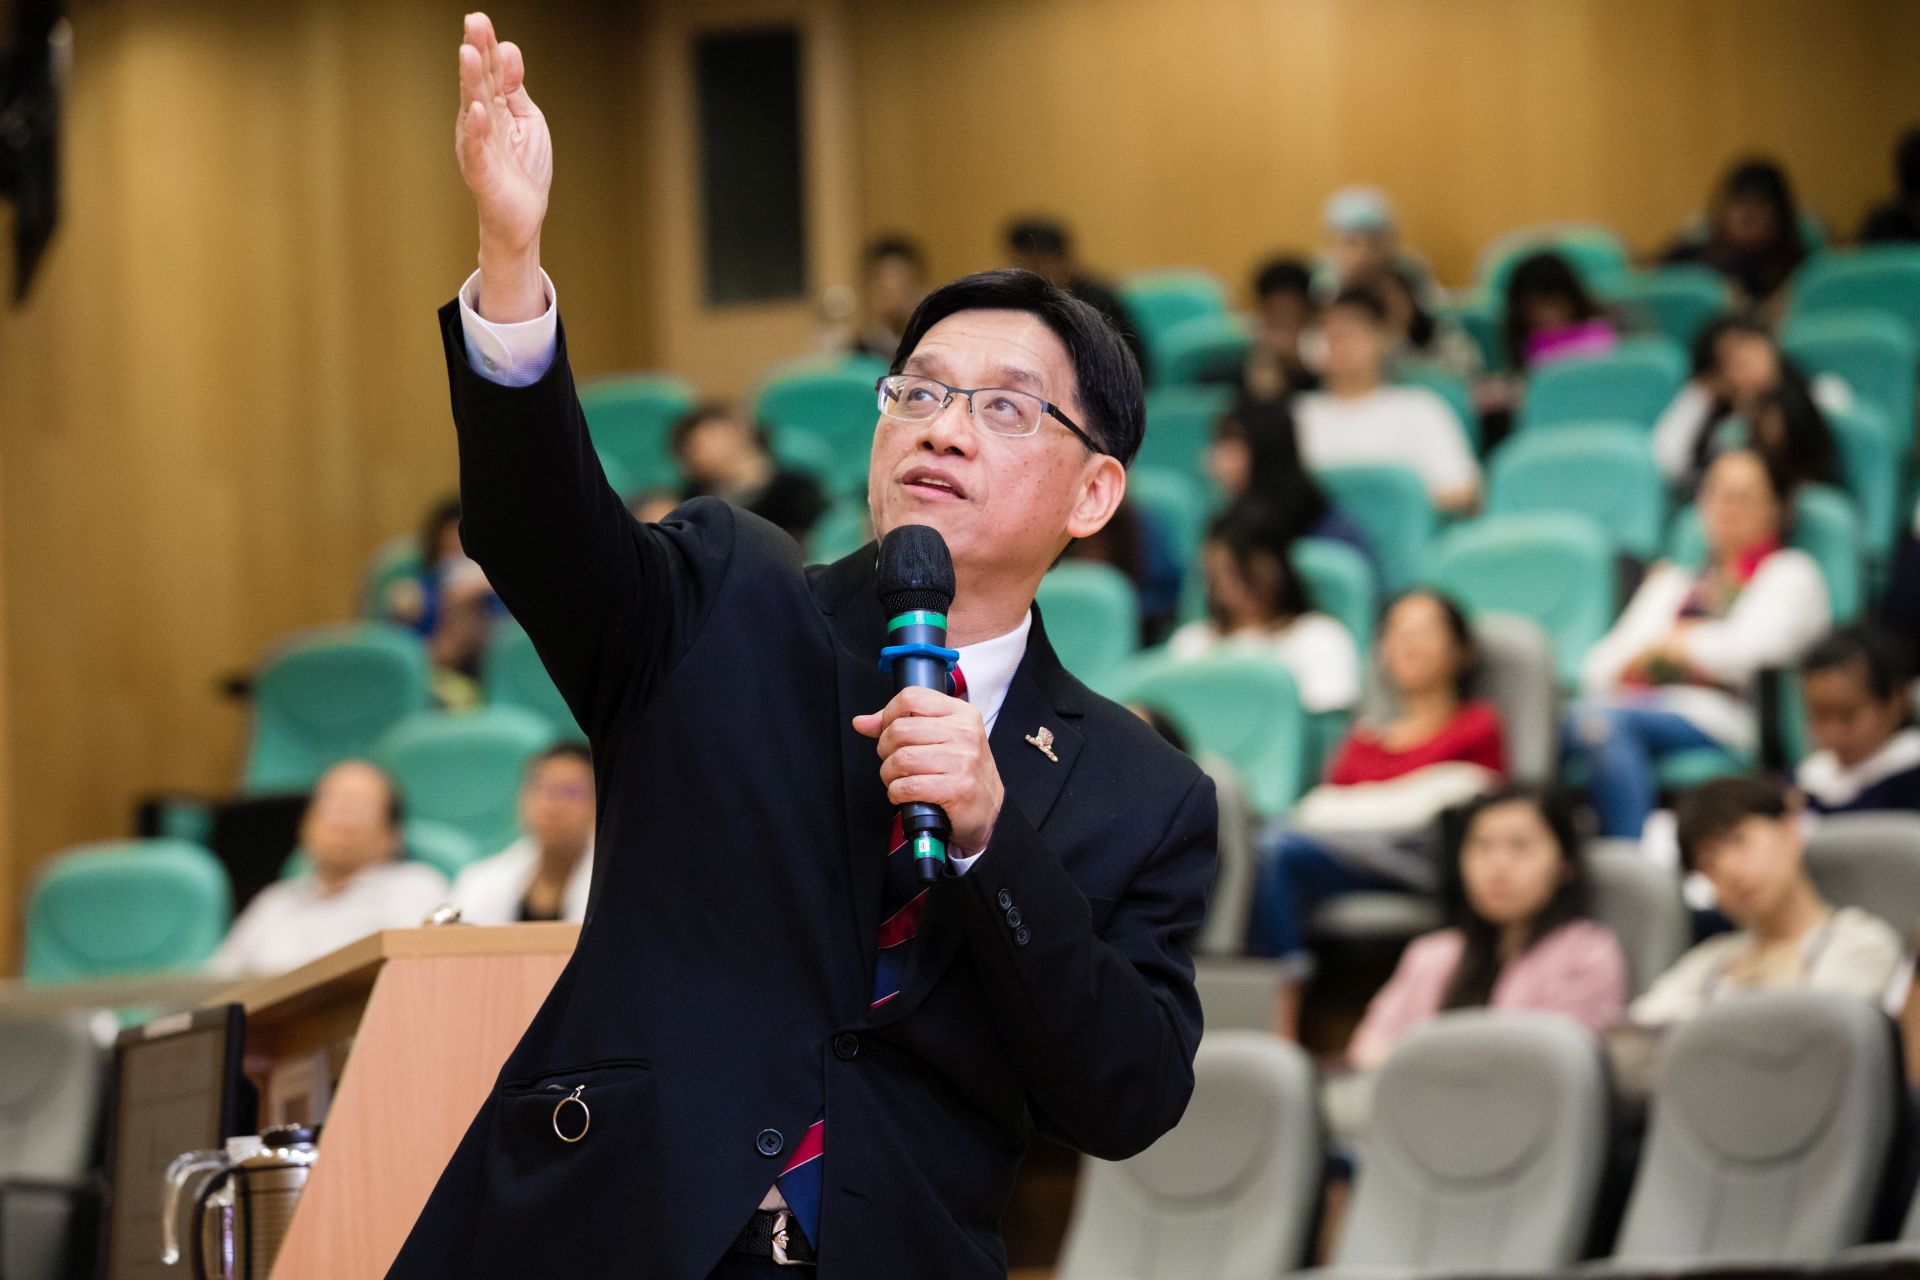 TWC Public Lecture: What is success: How can a secondary school student achieve success?